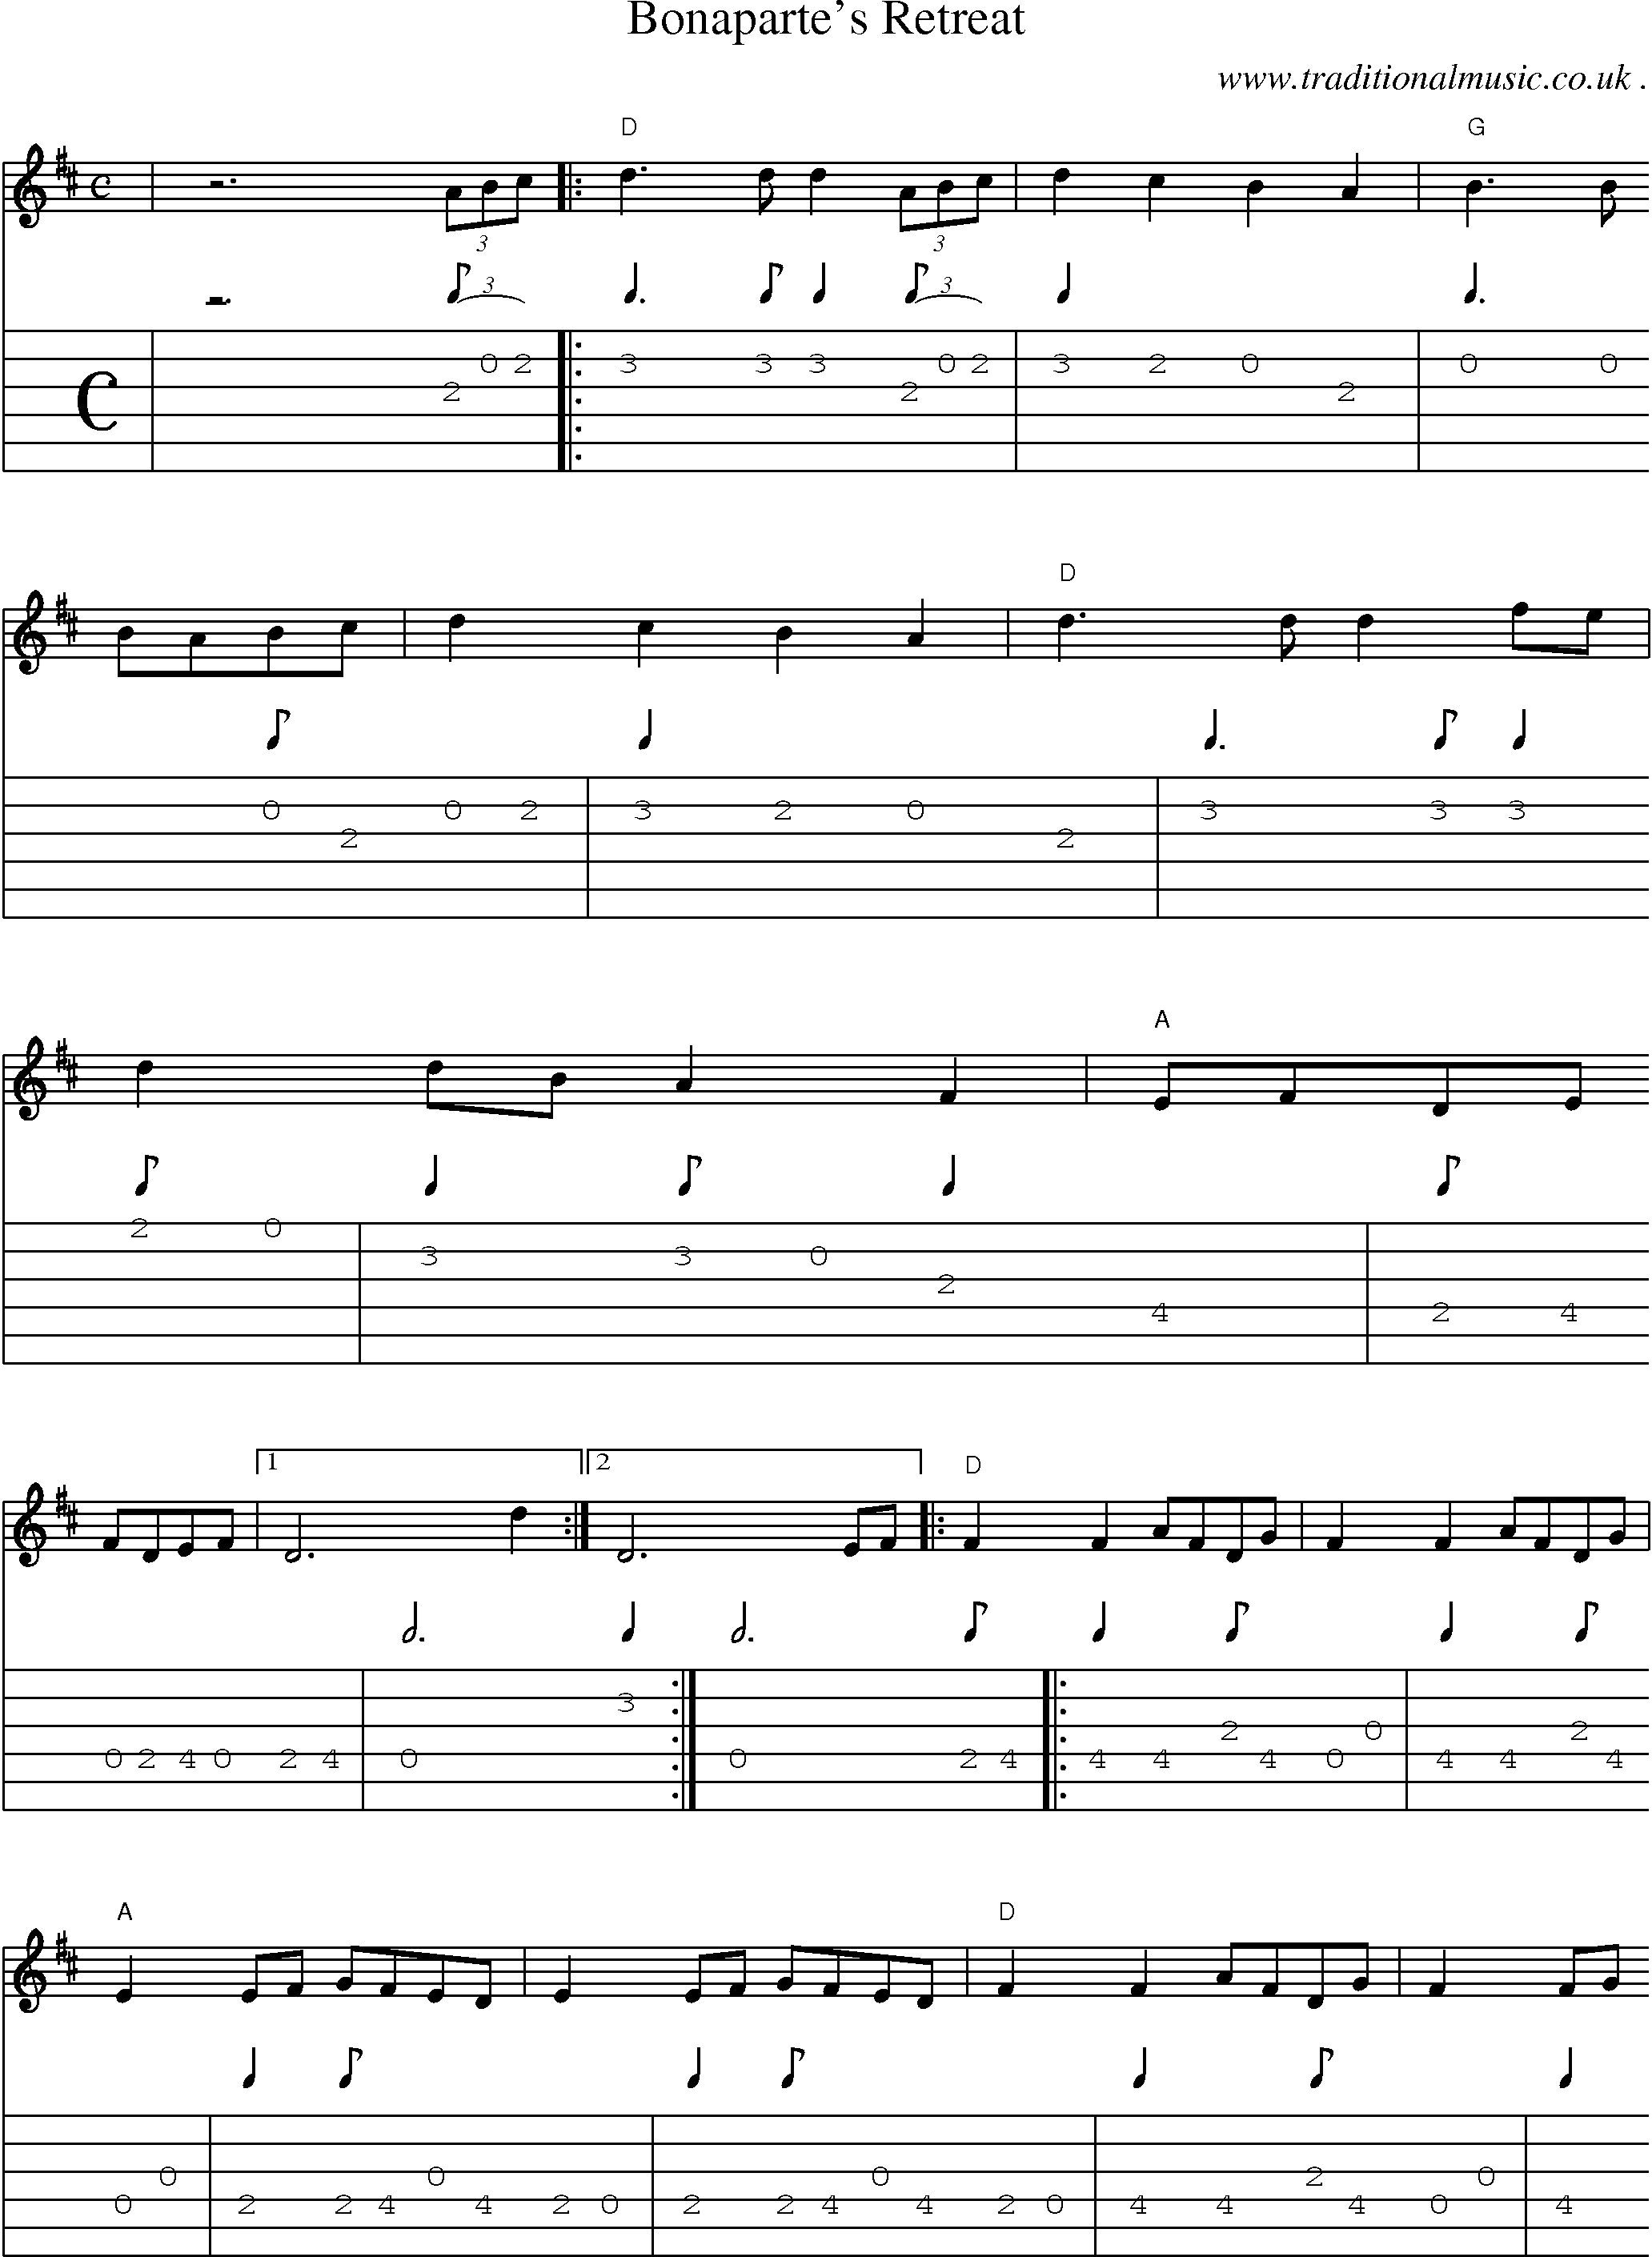 Music Score and Guitar Tabs for Bonapartes Retreat